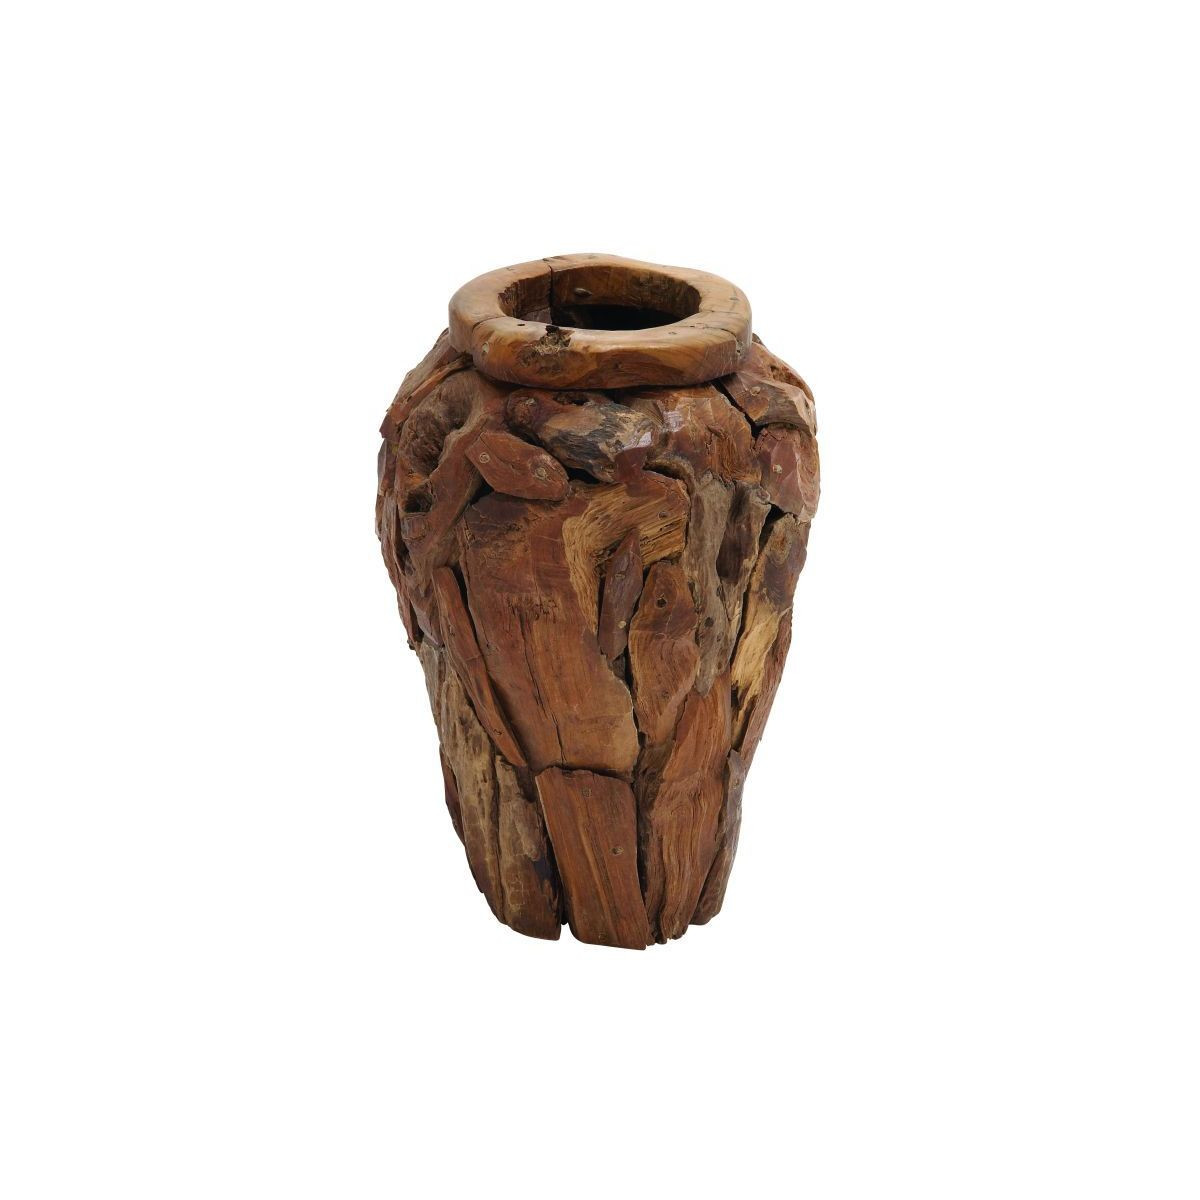 10 attractive 20 Inch Vase 2024 free download 20 inch vase of small wood vases compare prices at nextag with studio 350 teak wood 14 inches wide x 20 inches high vase